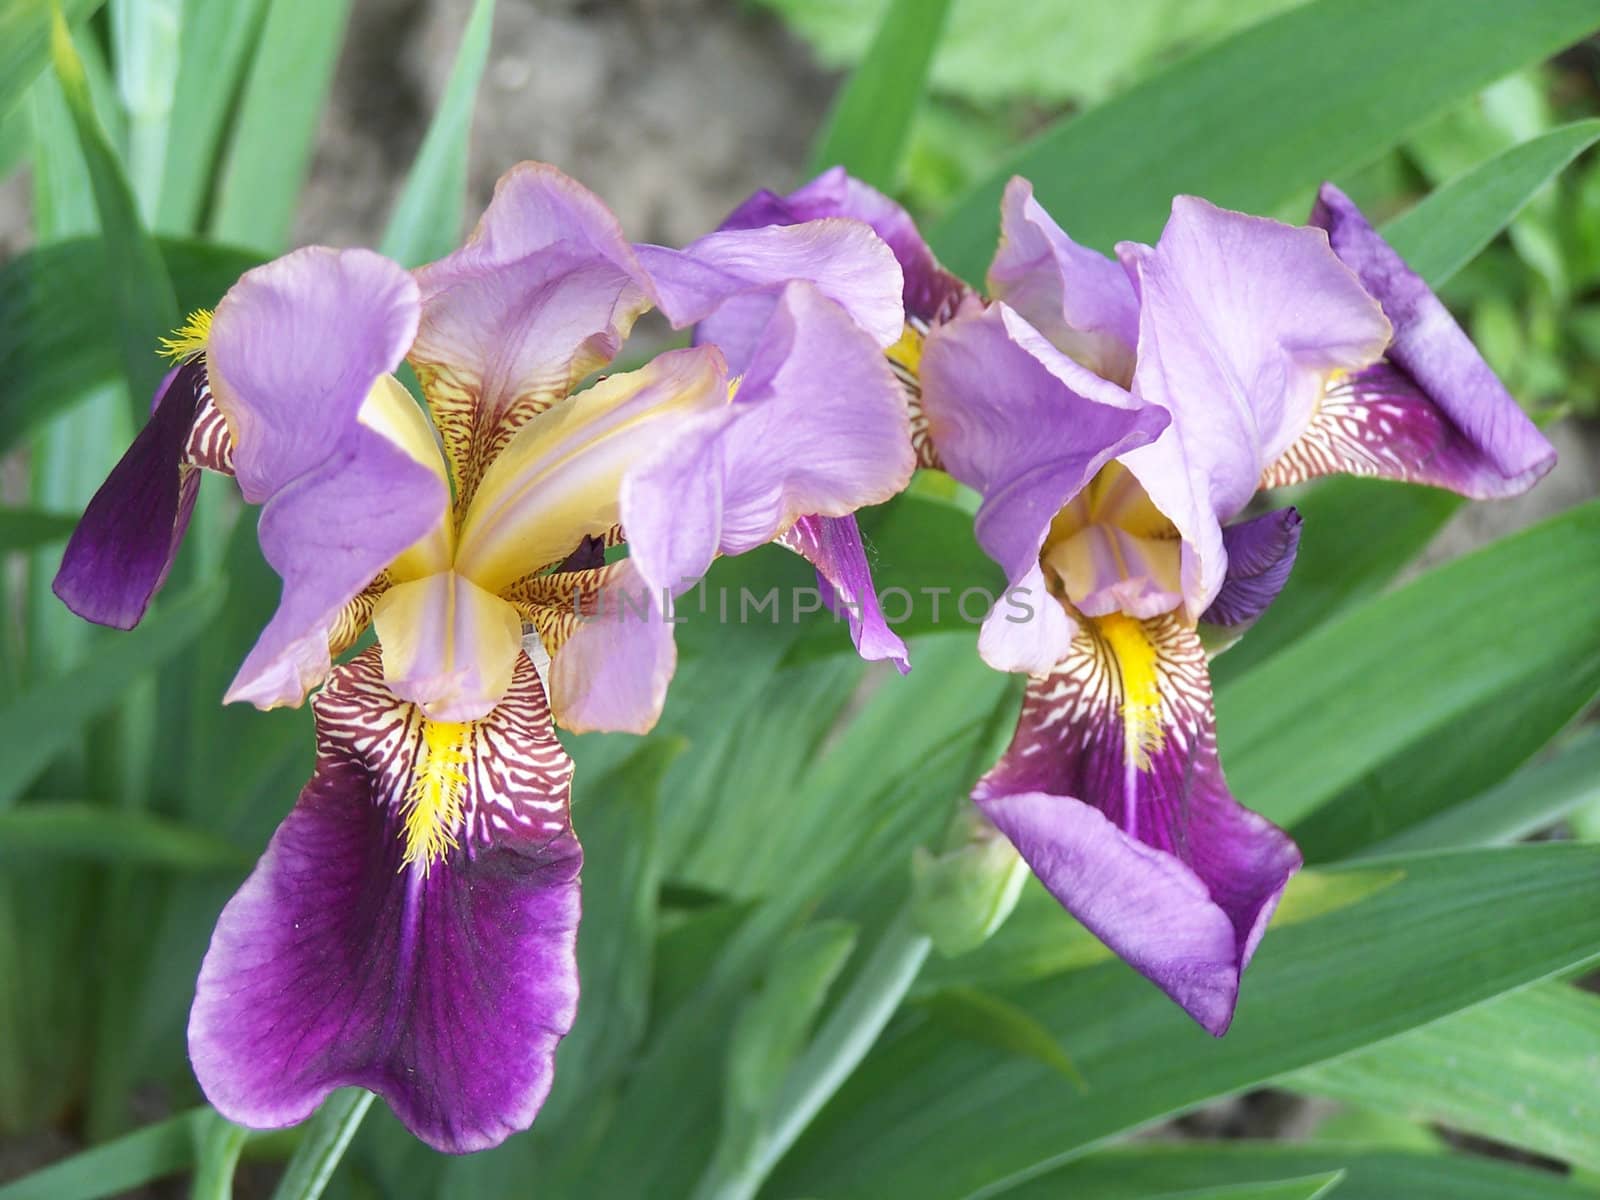 Close up of the two iris blossoms